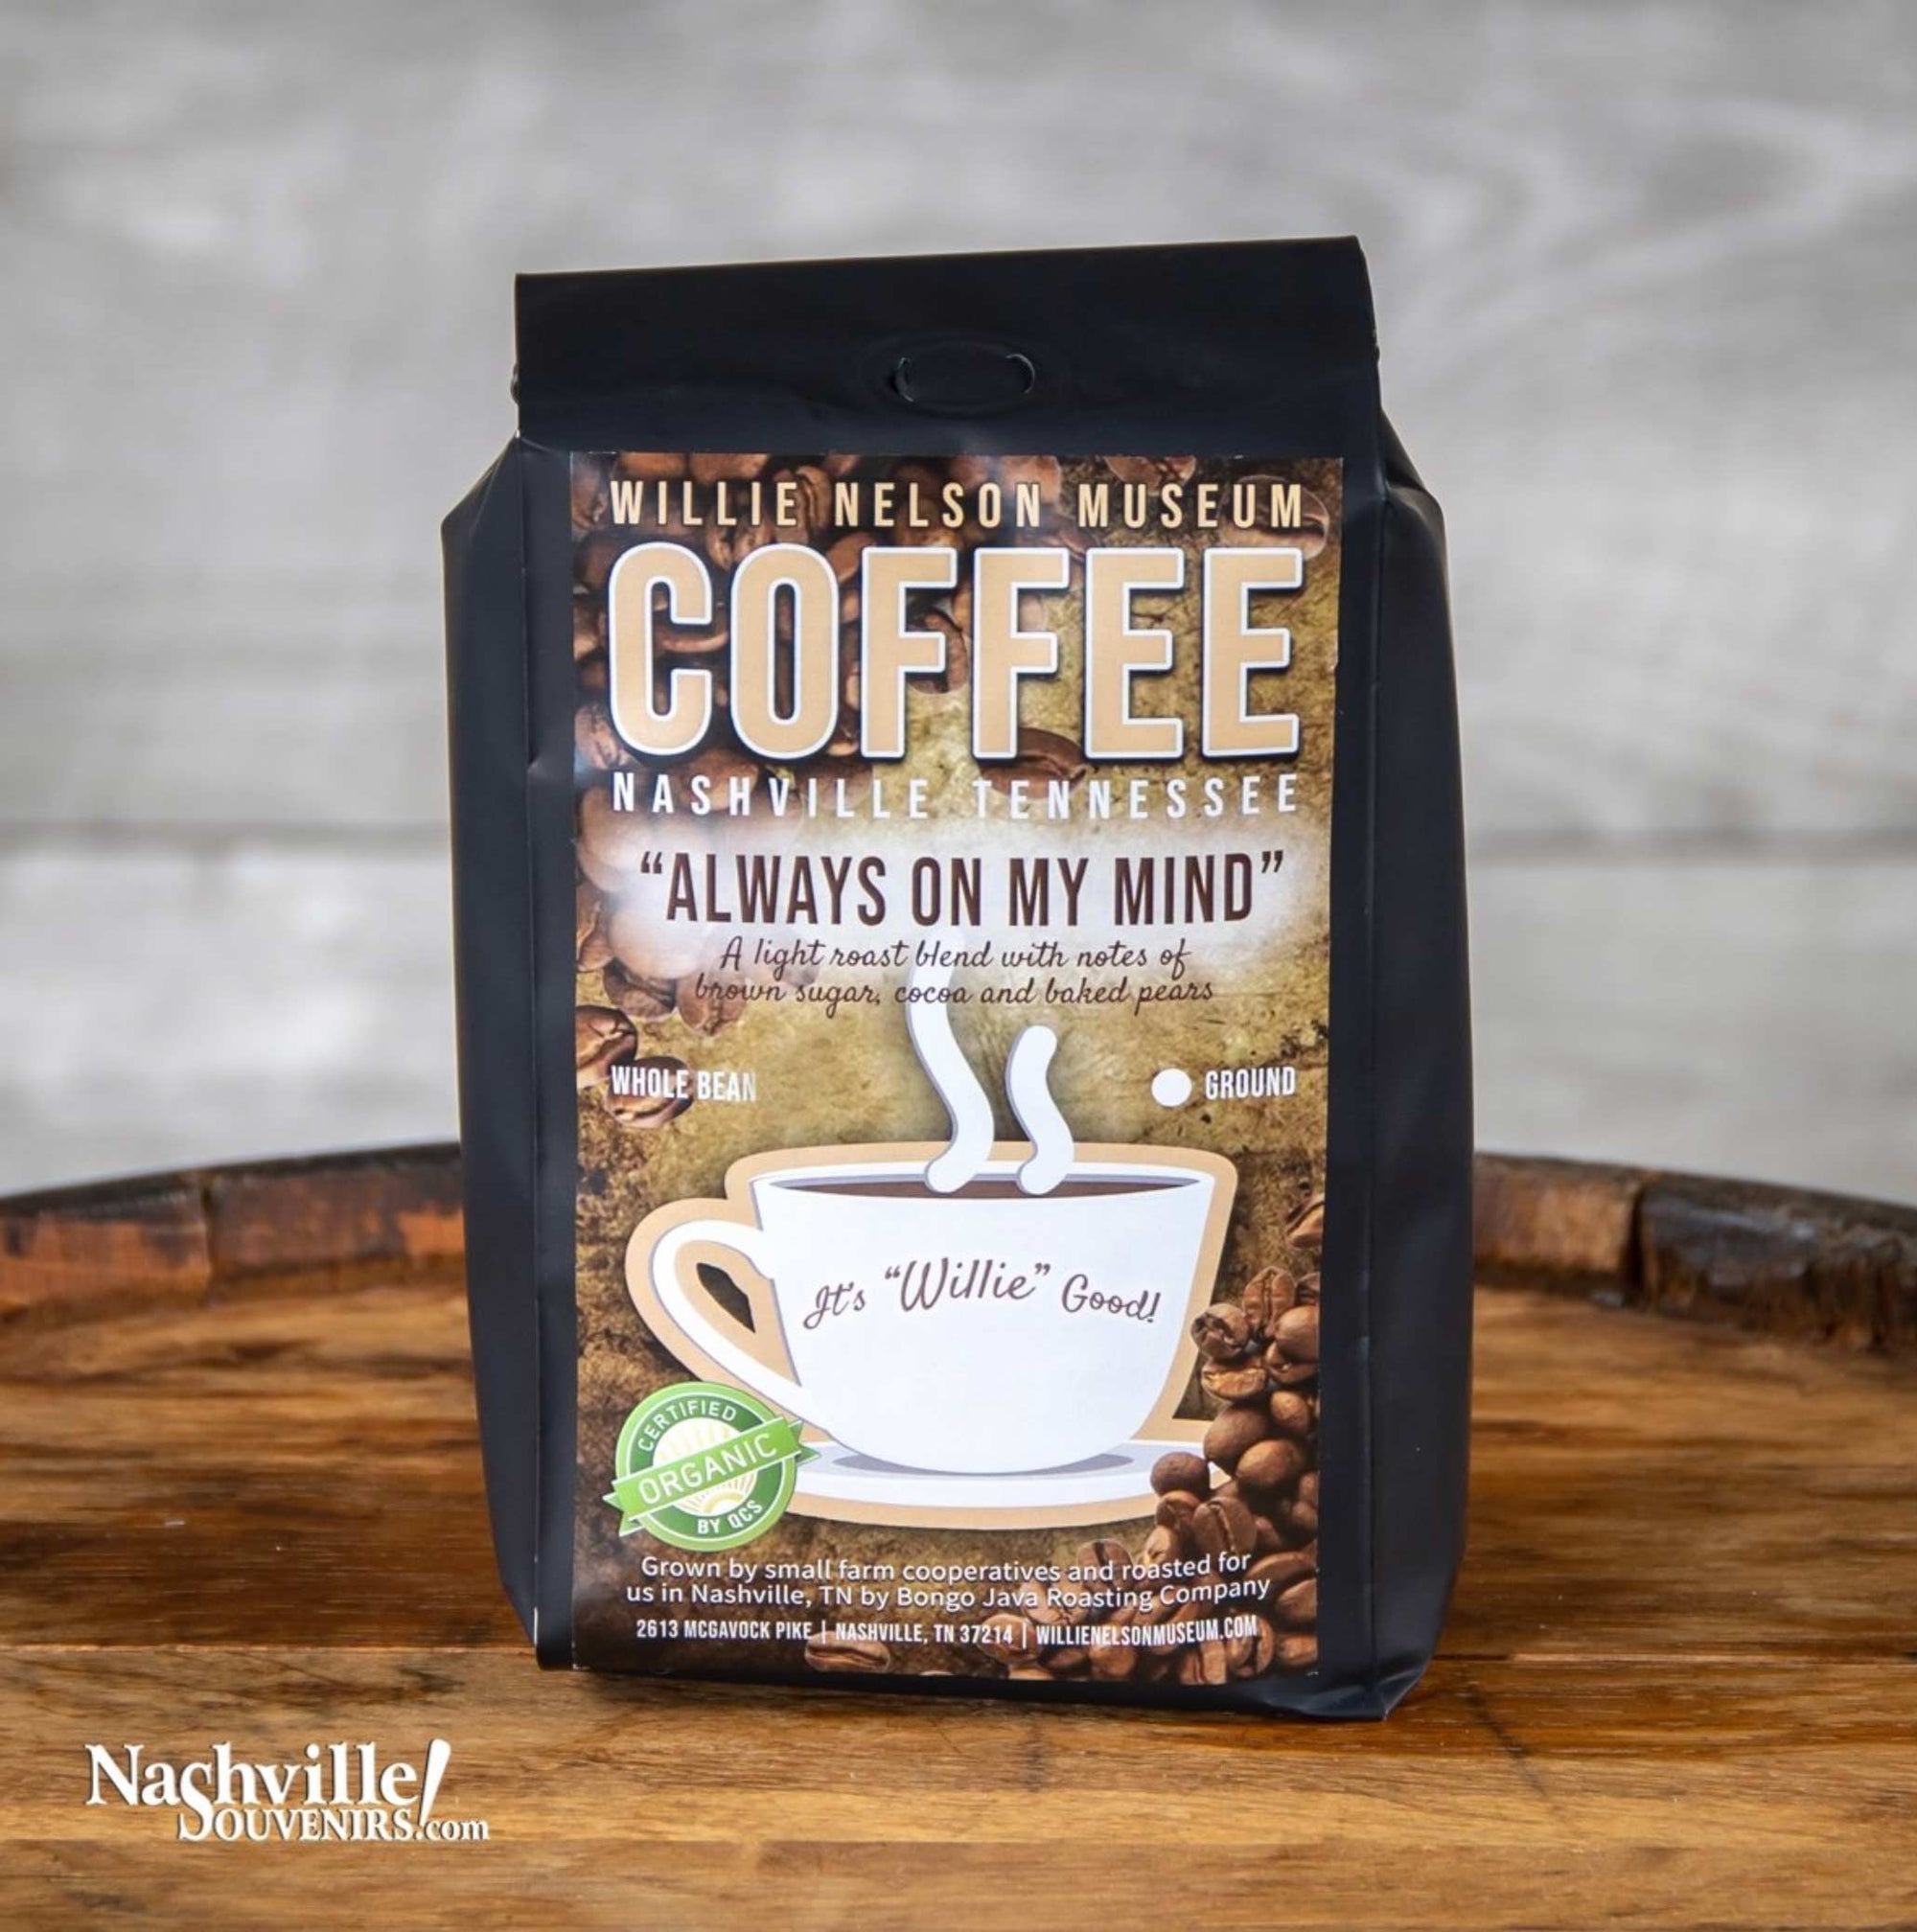 Willie Nelson "Always on my MInd" ground organic coffee available in 12 ounce bags.